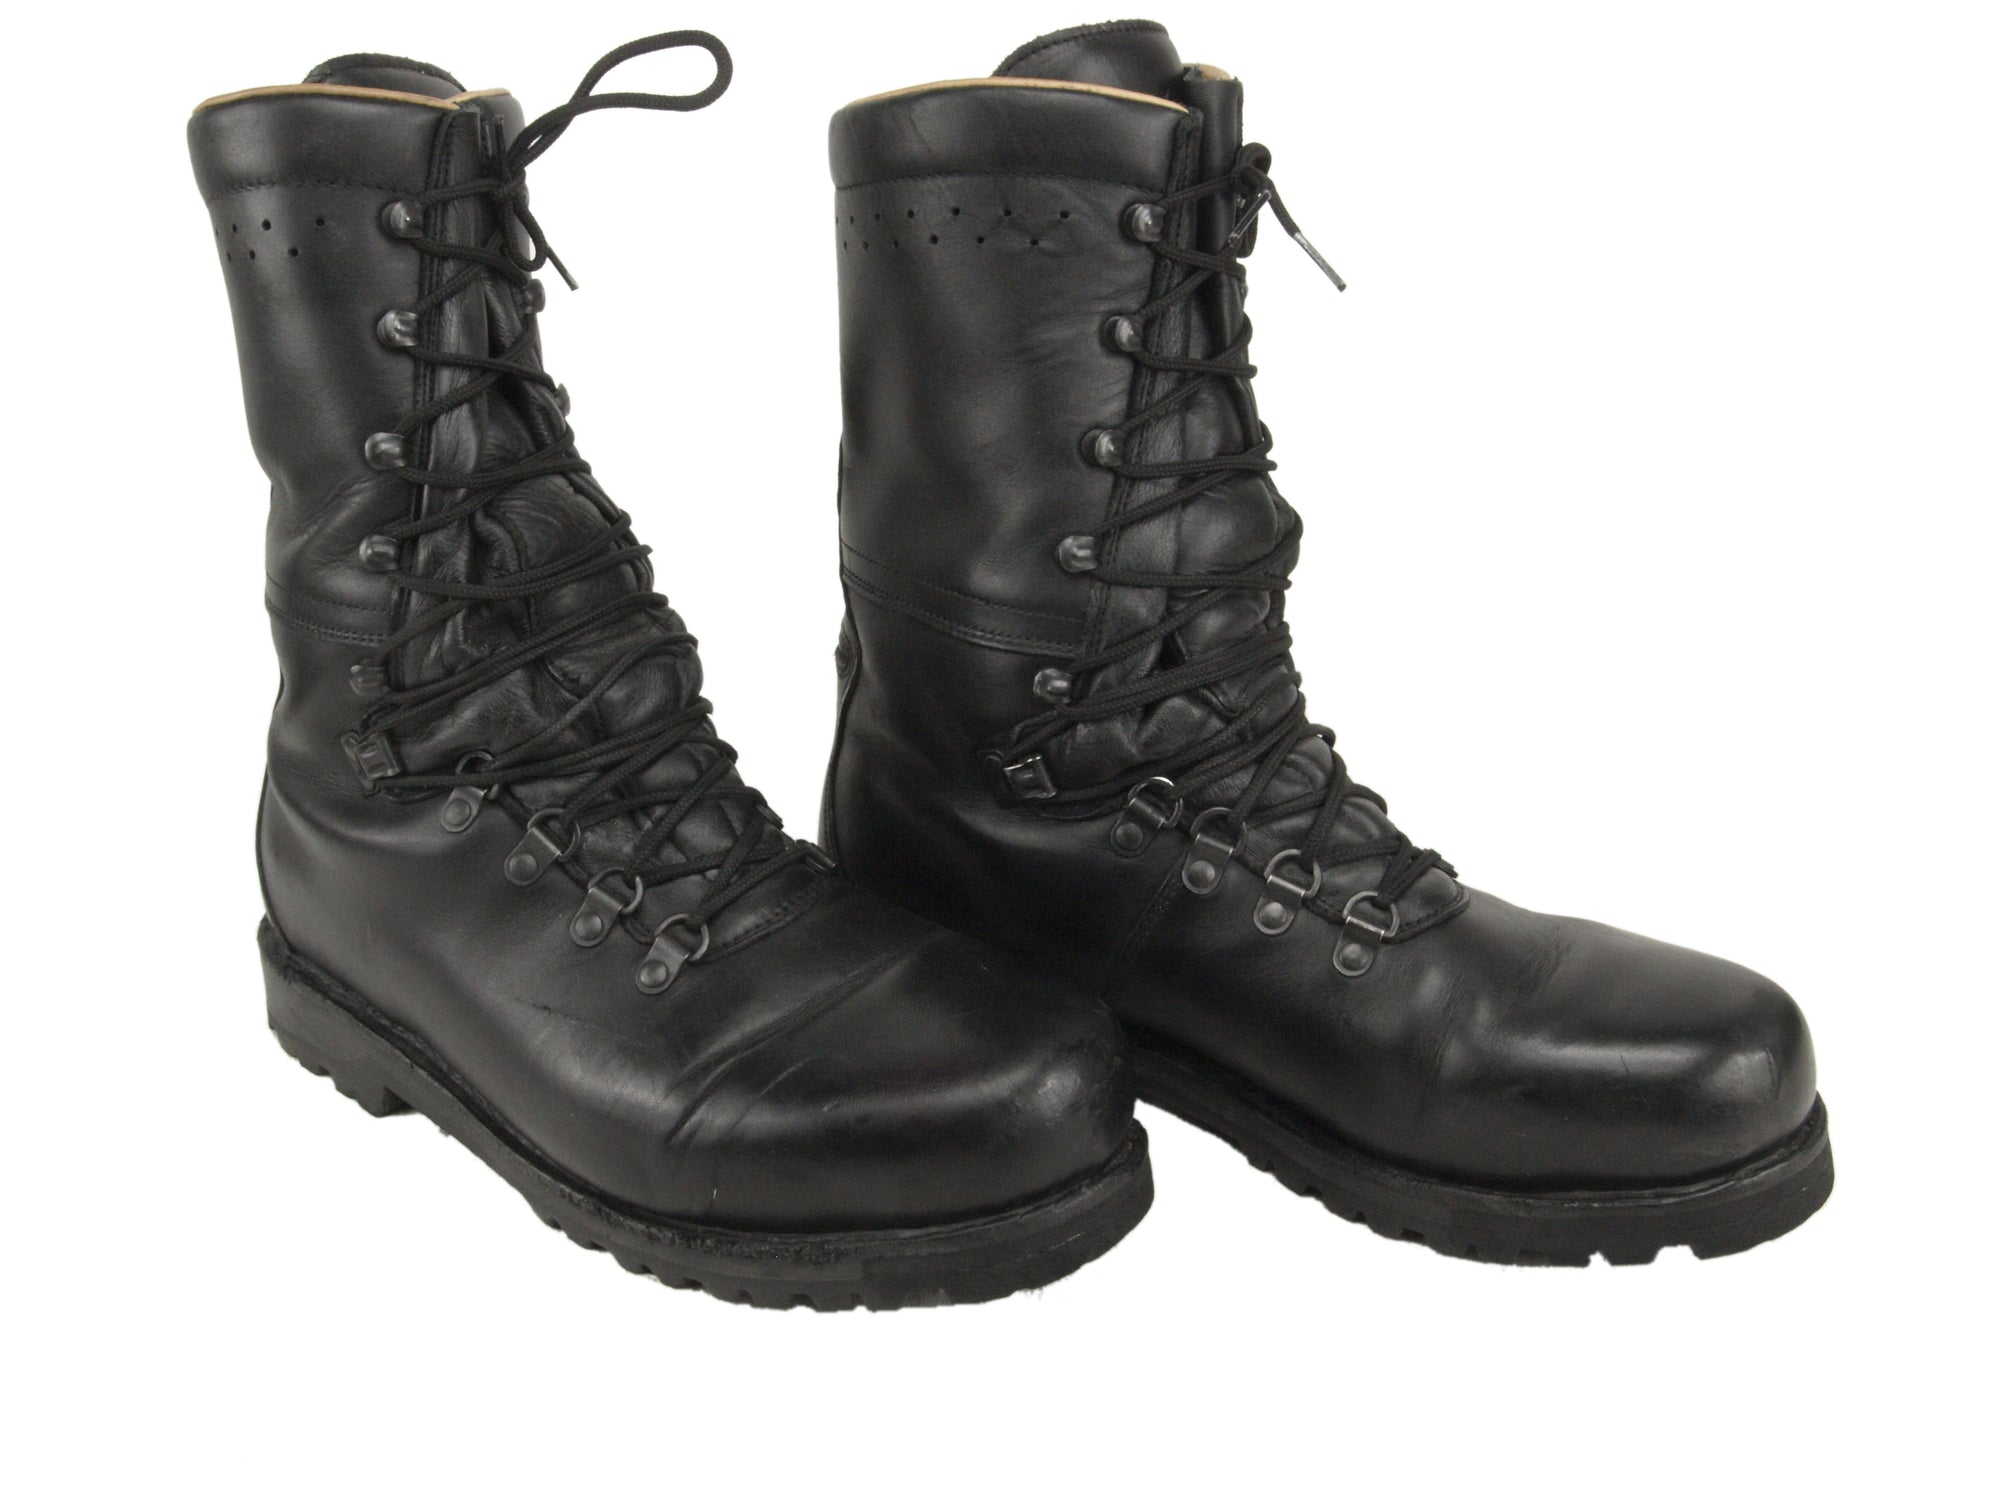 Austrian Army Leather Combat Para Boots